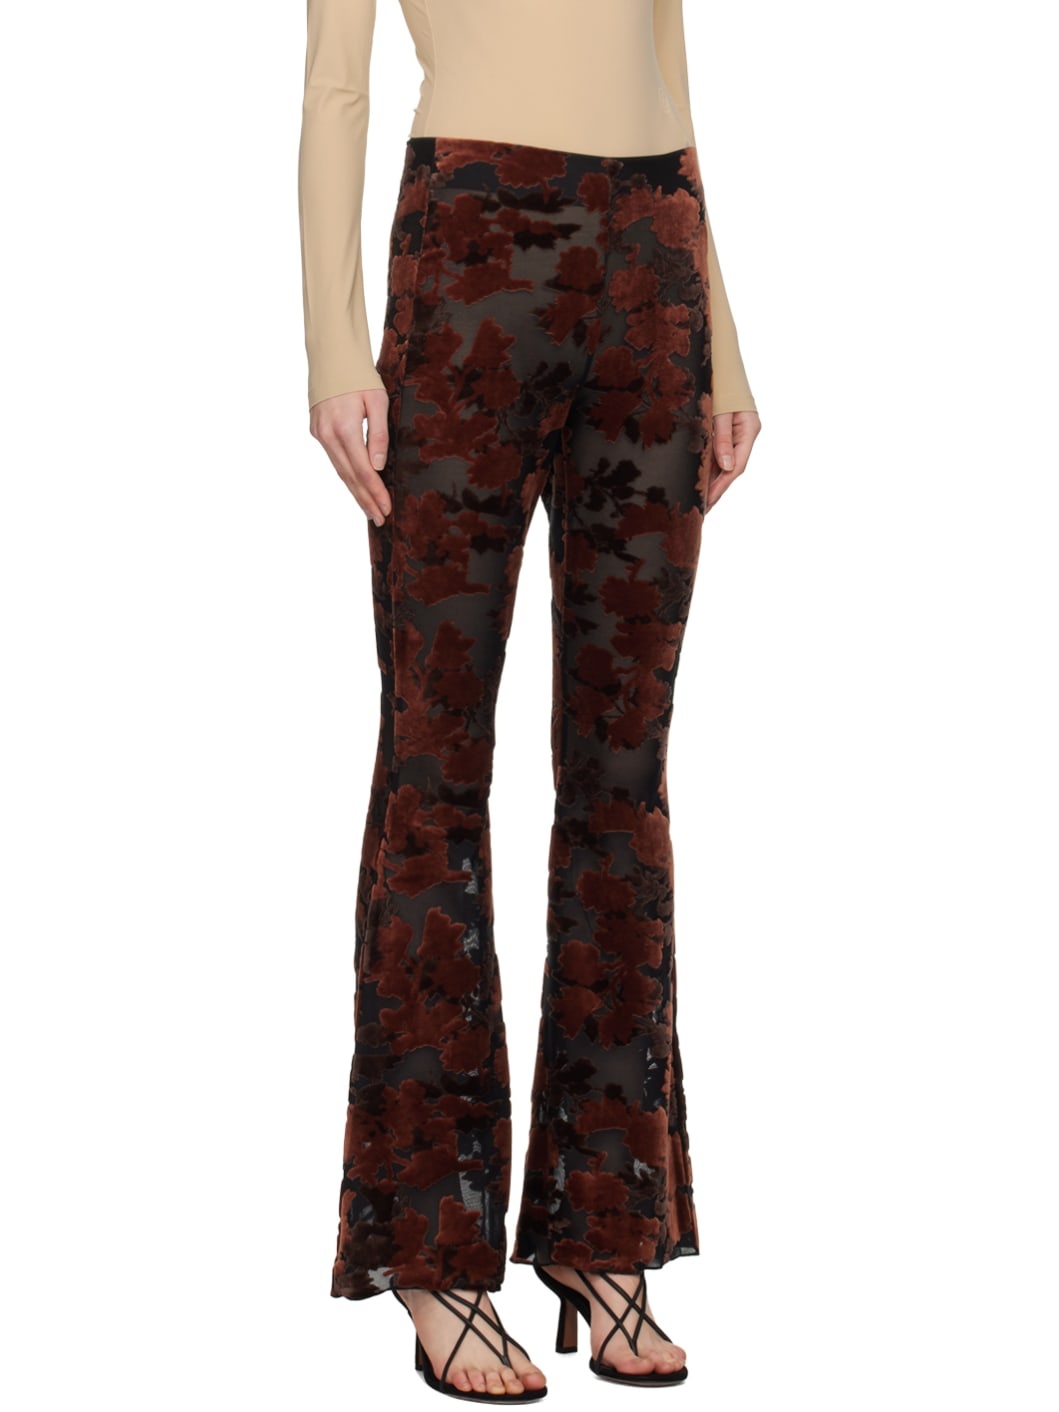 Brown & Black Gilly Devore Trousers - 2